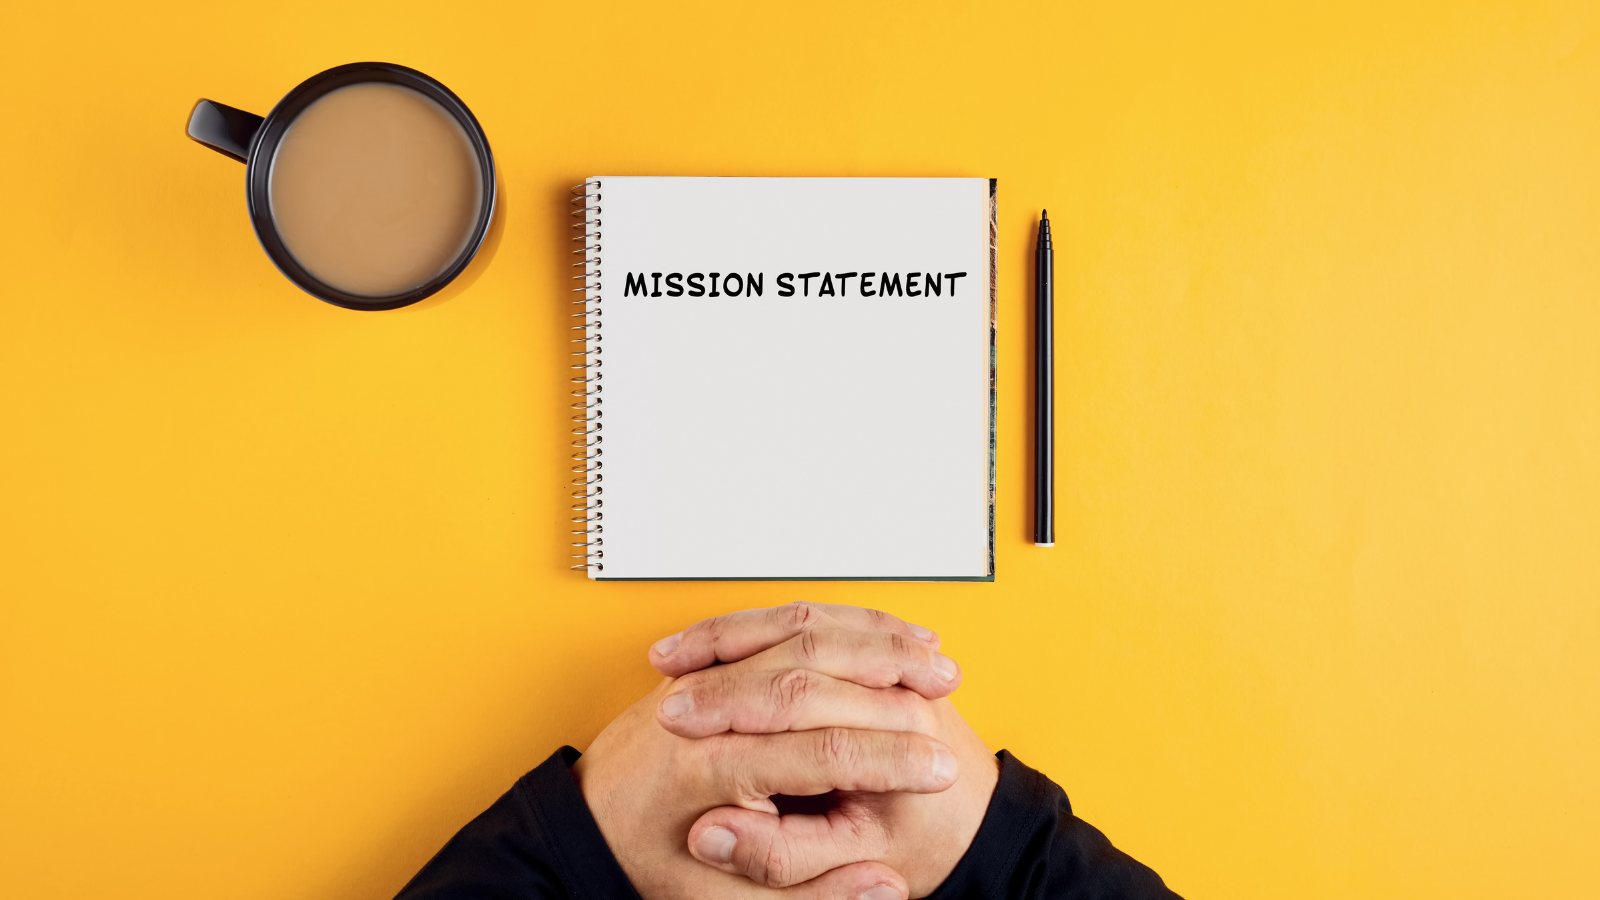 What Makes a Mission Statement Successful?